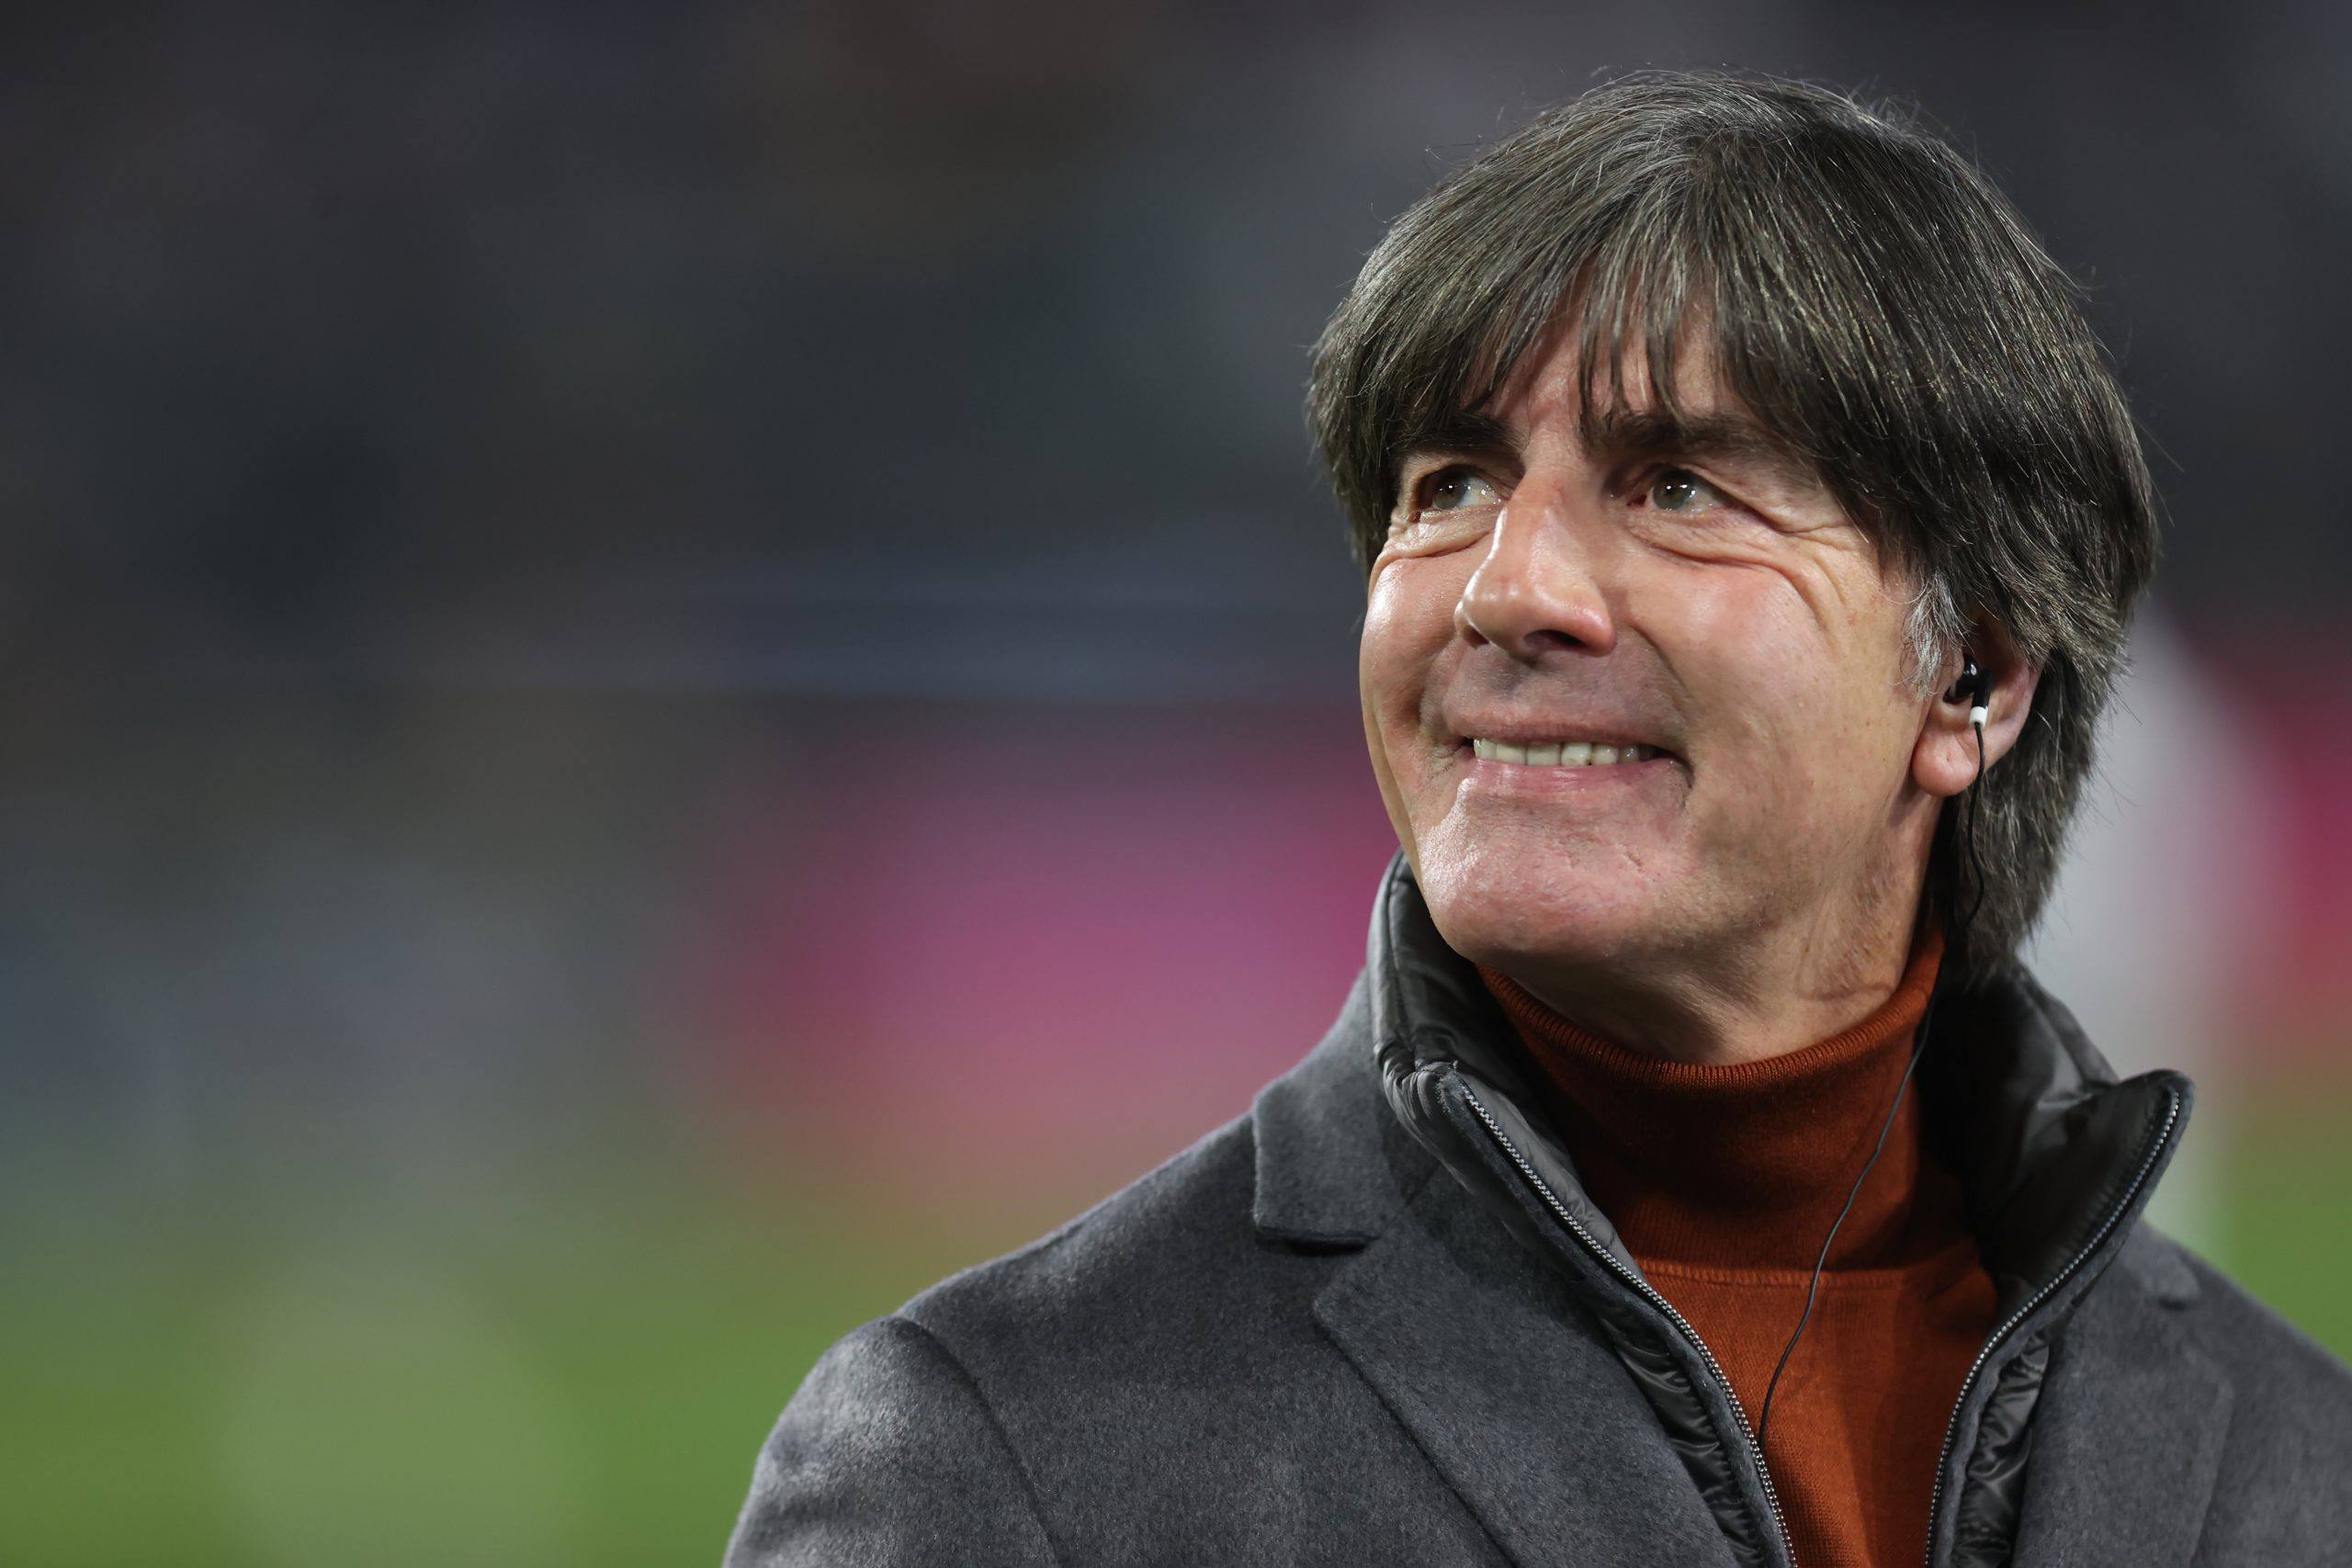 23-mind-blowing-facts-about-joachim-low